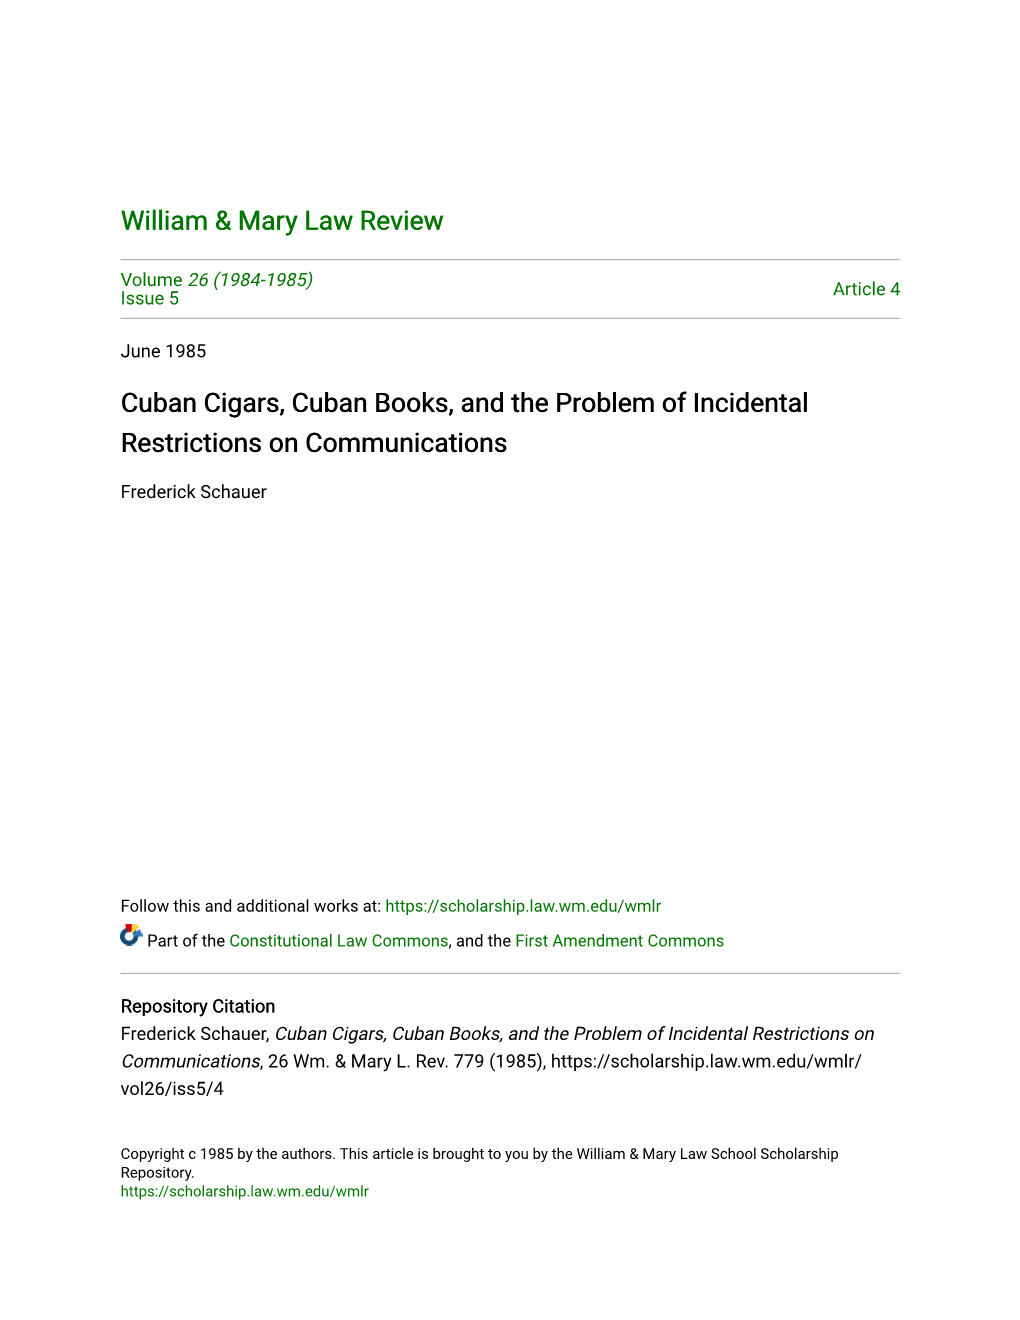 Cuban Cigars, Cuban Books, and the Problem of Incidental Restrictions on Communications